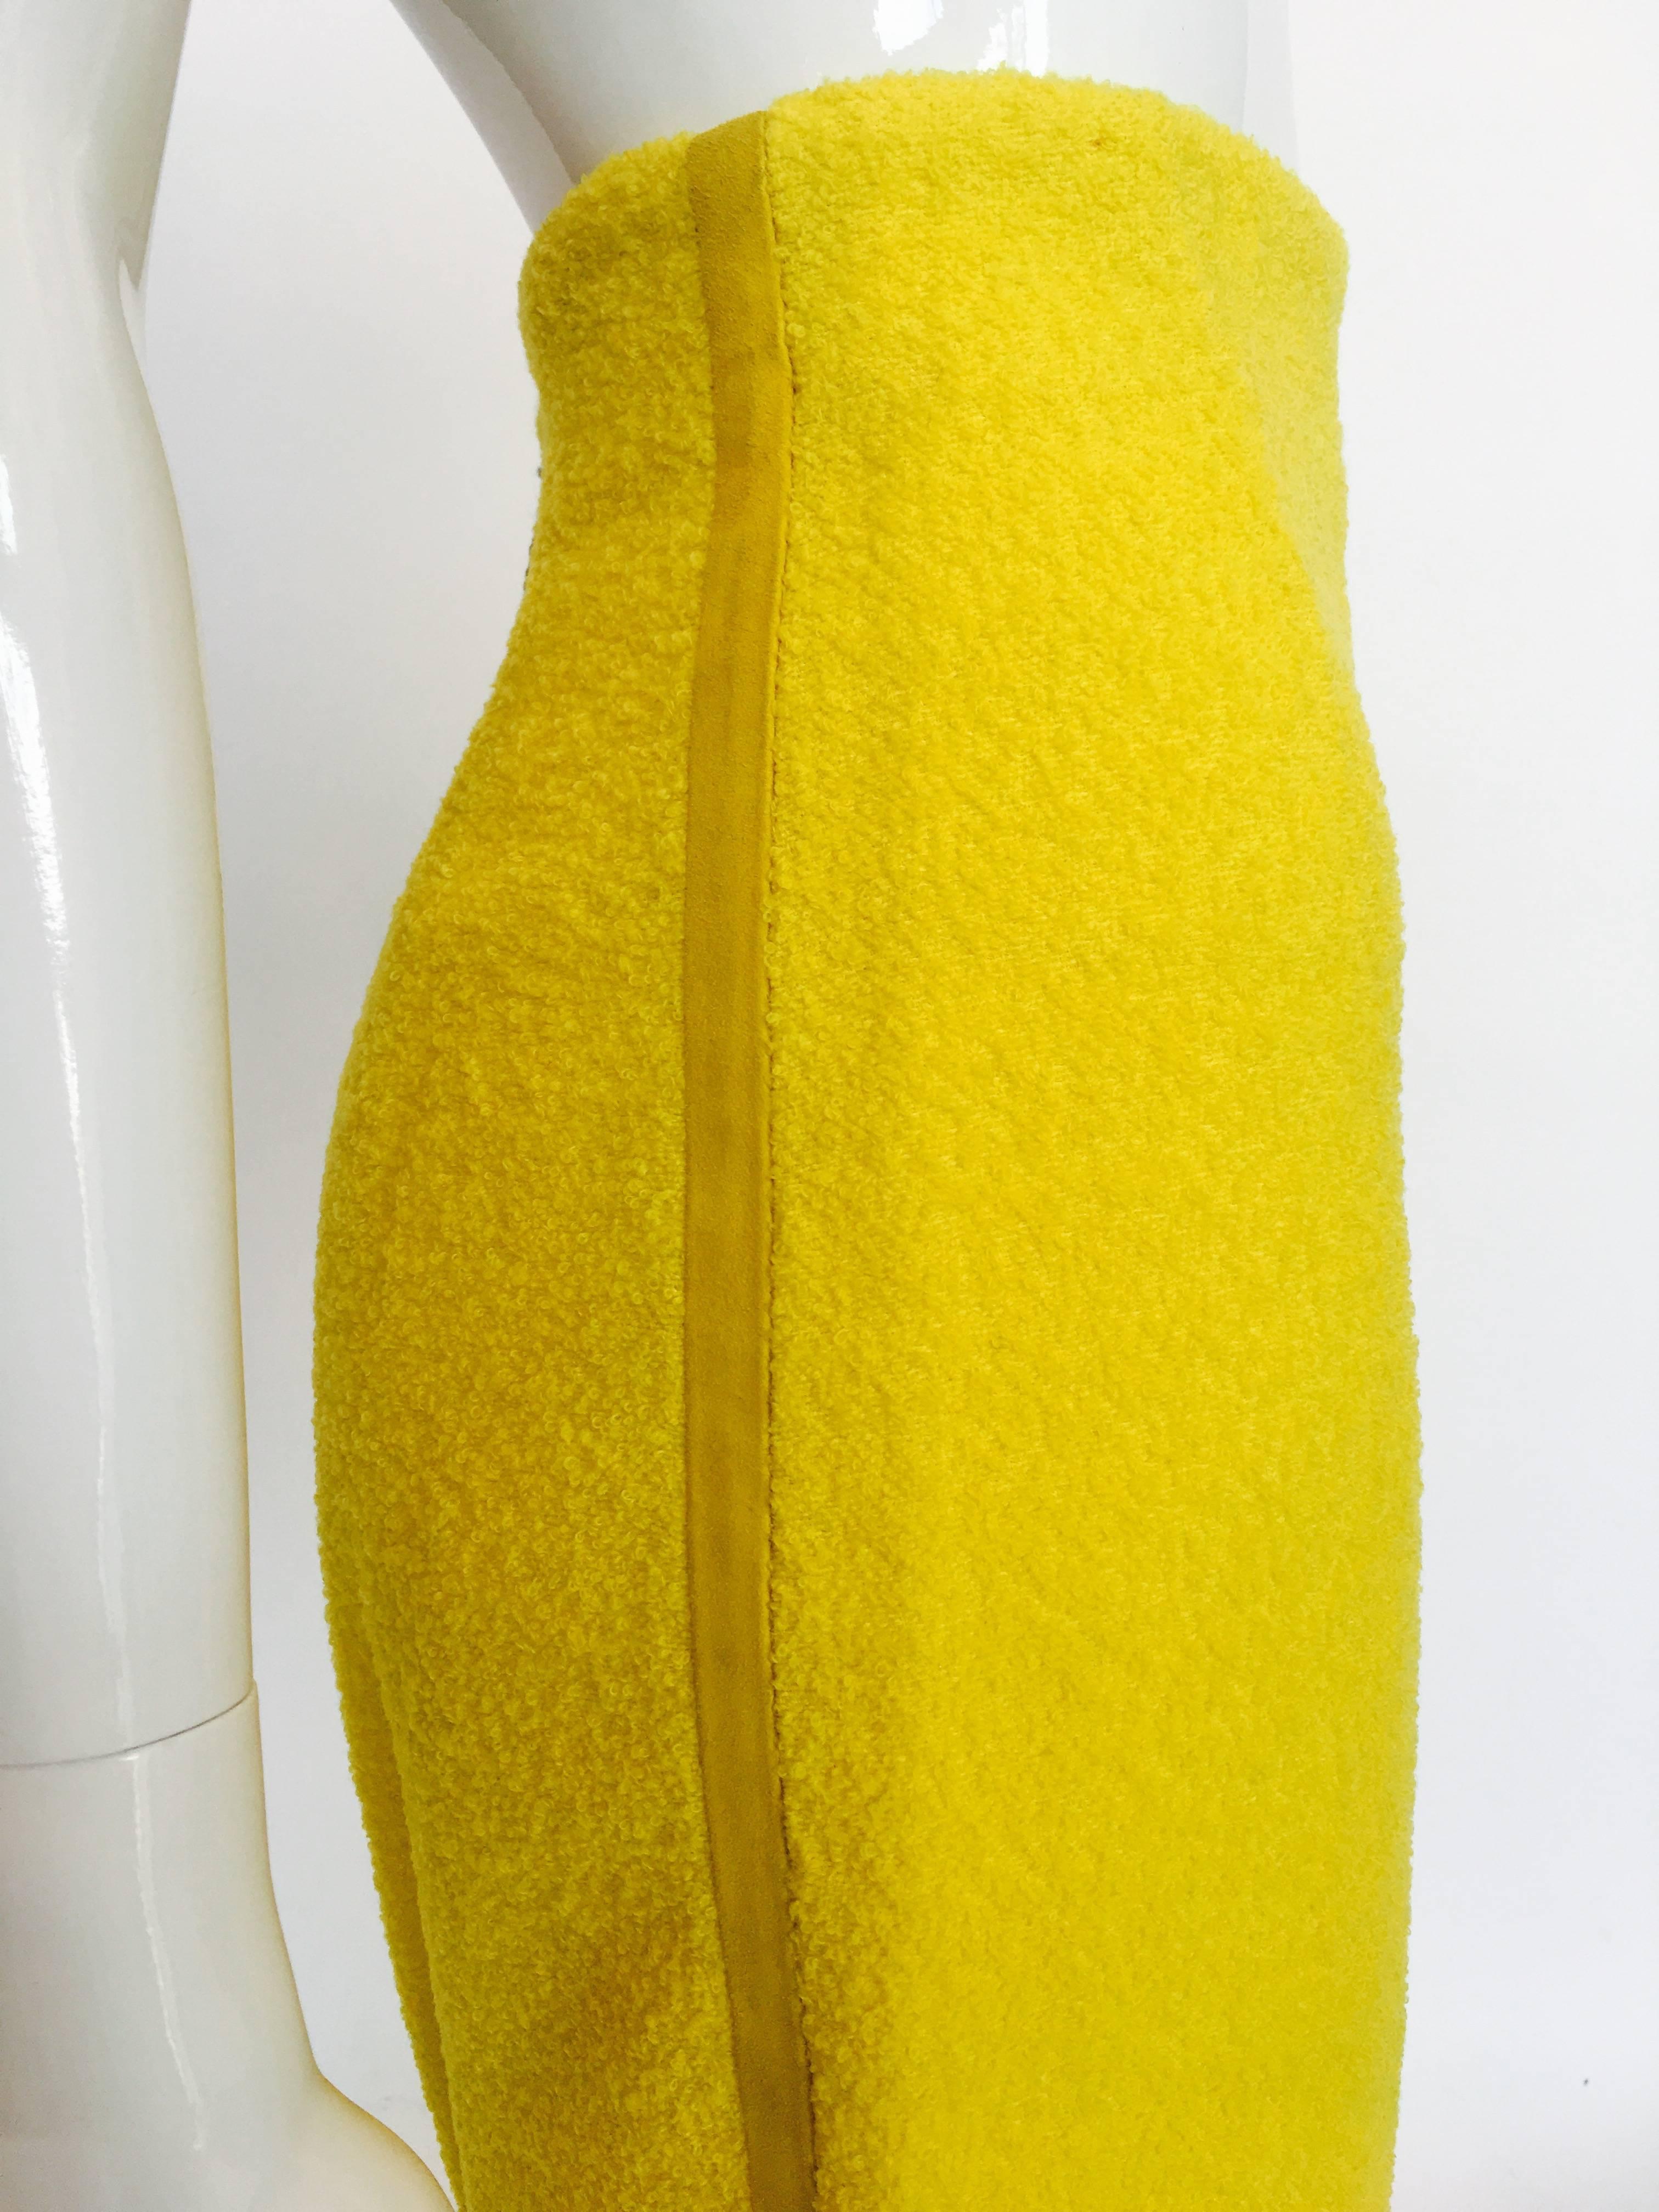 Women's or Men's Gianni Versace Yellow Nubby Knit 2 Pc Skirt Suit